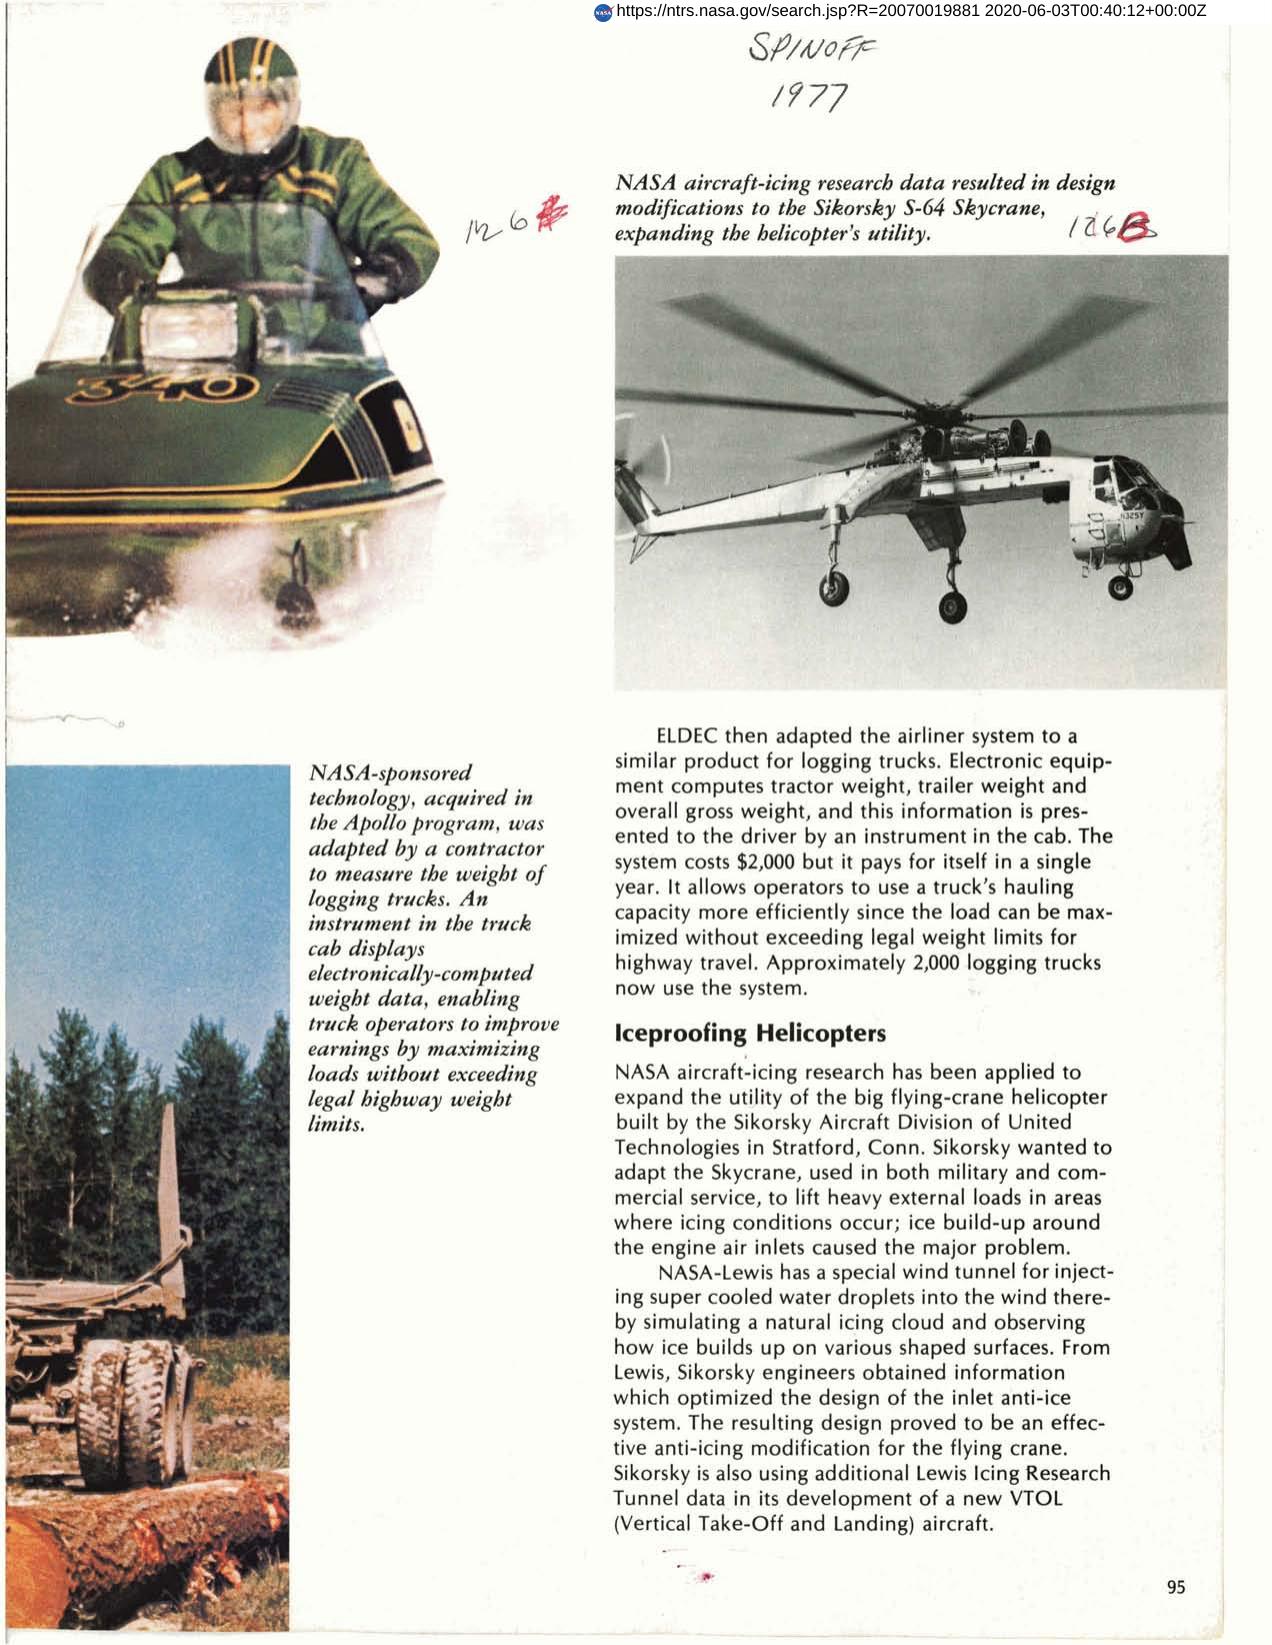 Iceproofing Helicopters